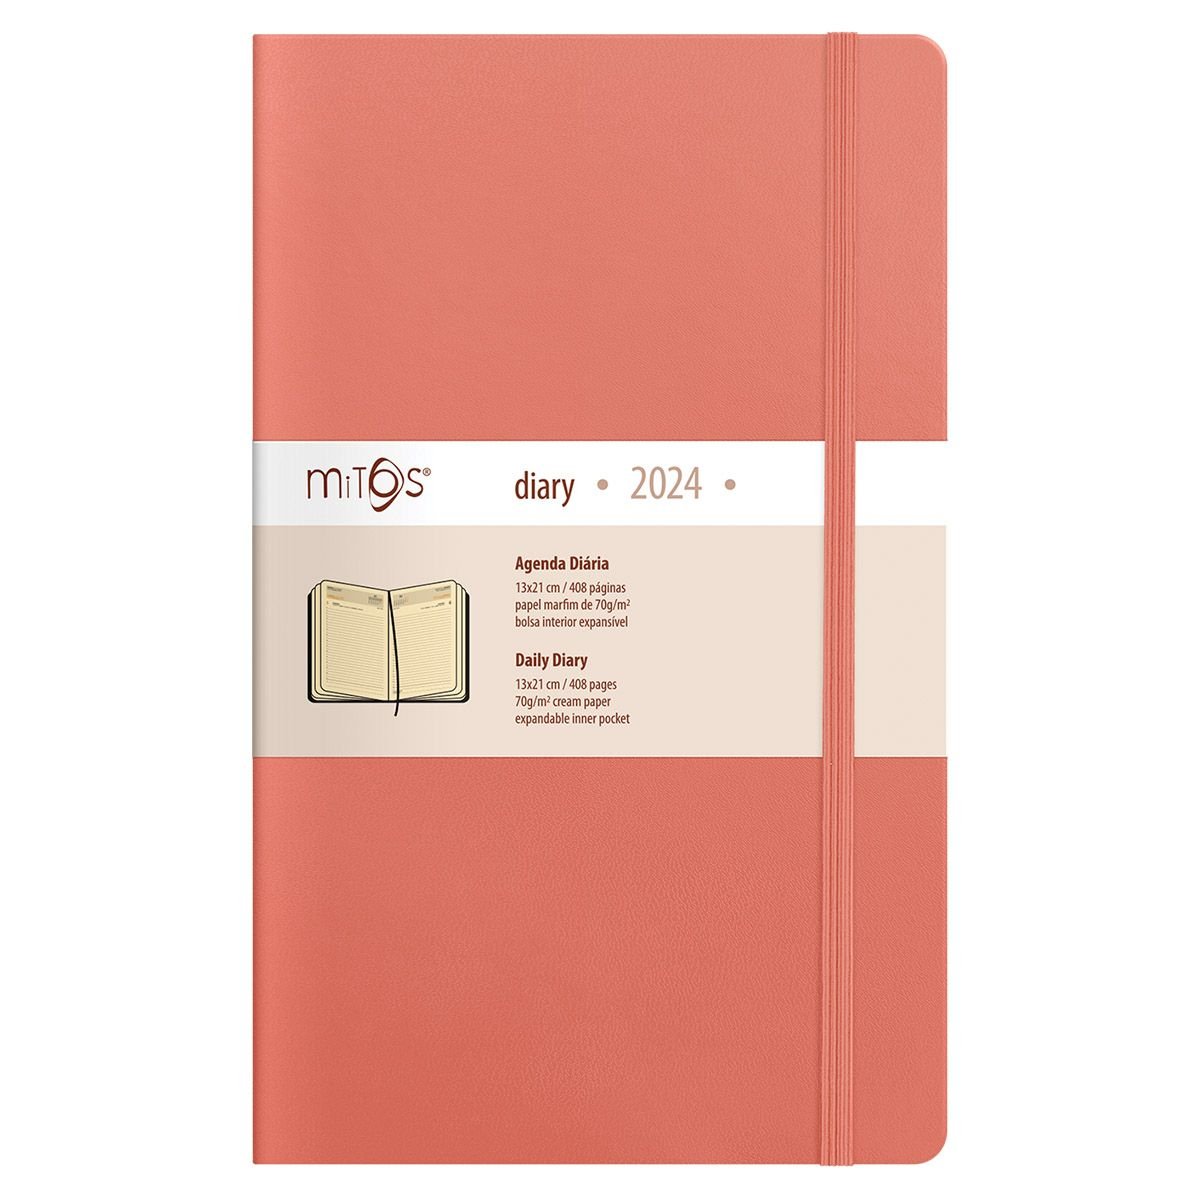 MITOS-Daily Diary (13x21cm-P18) Ivory Paper | Artimbal